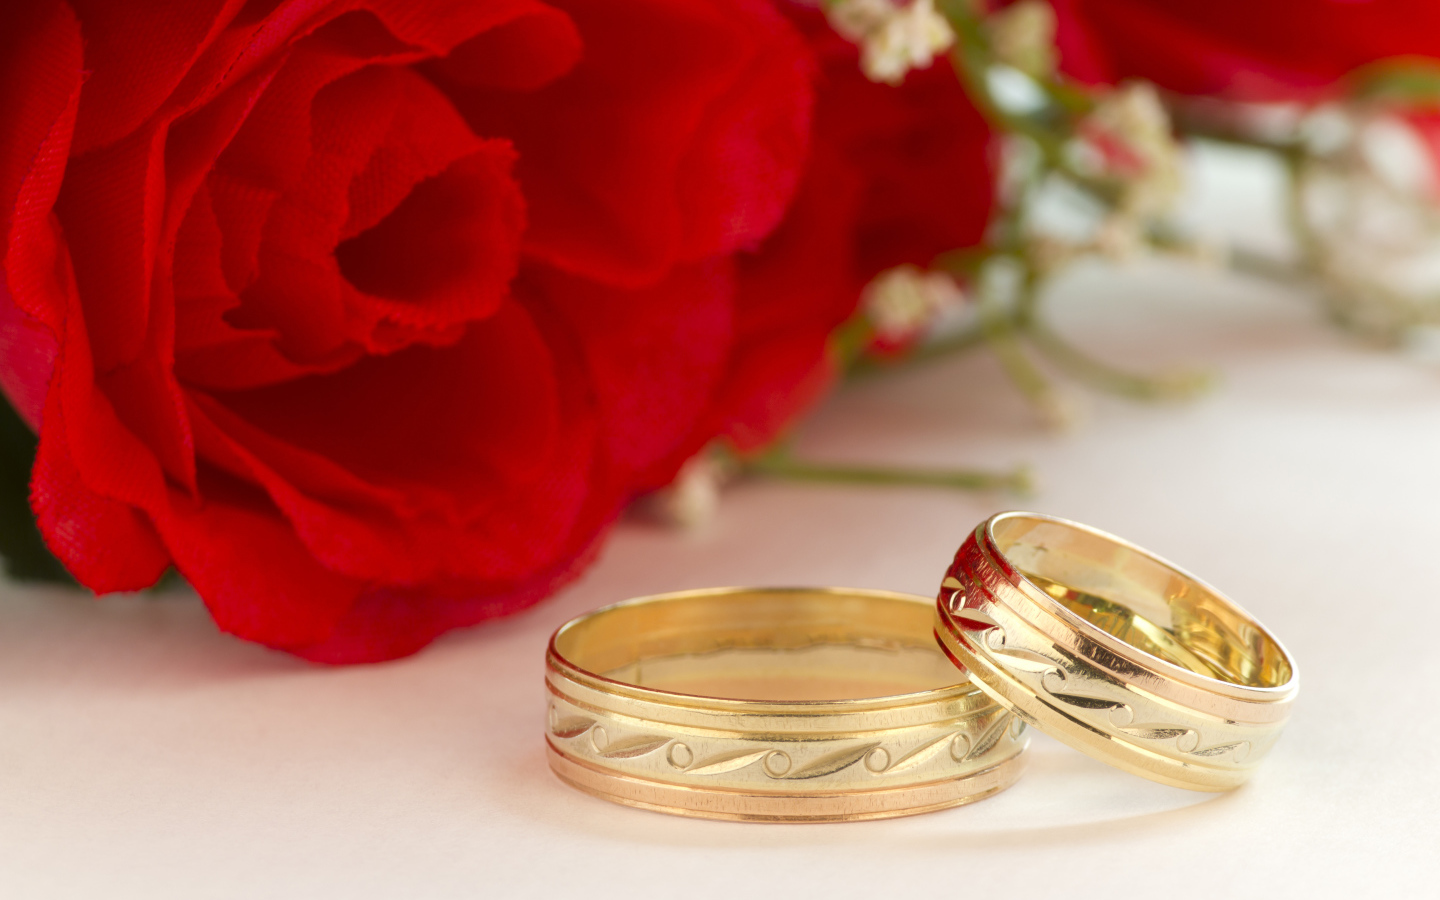 Gold wedding rings with a picture and red roses for a wedding